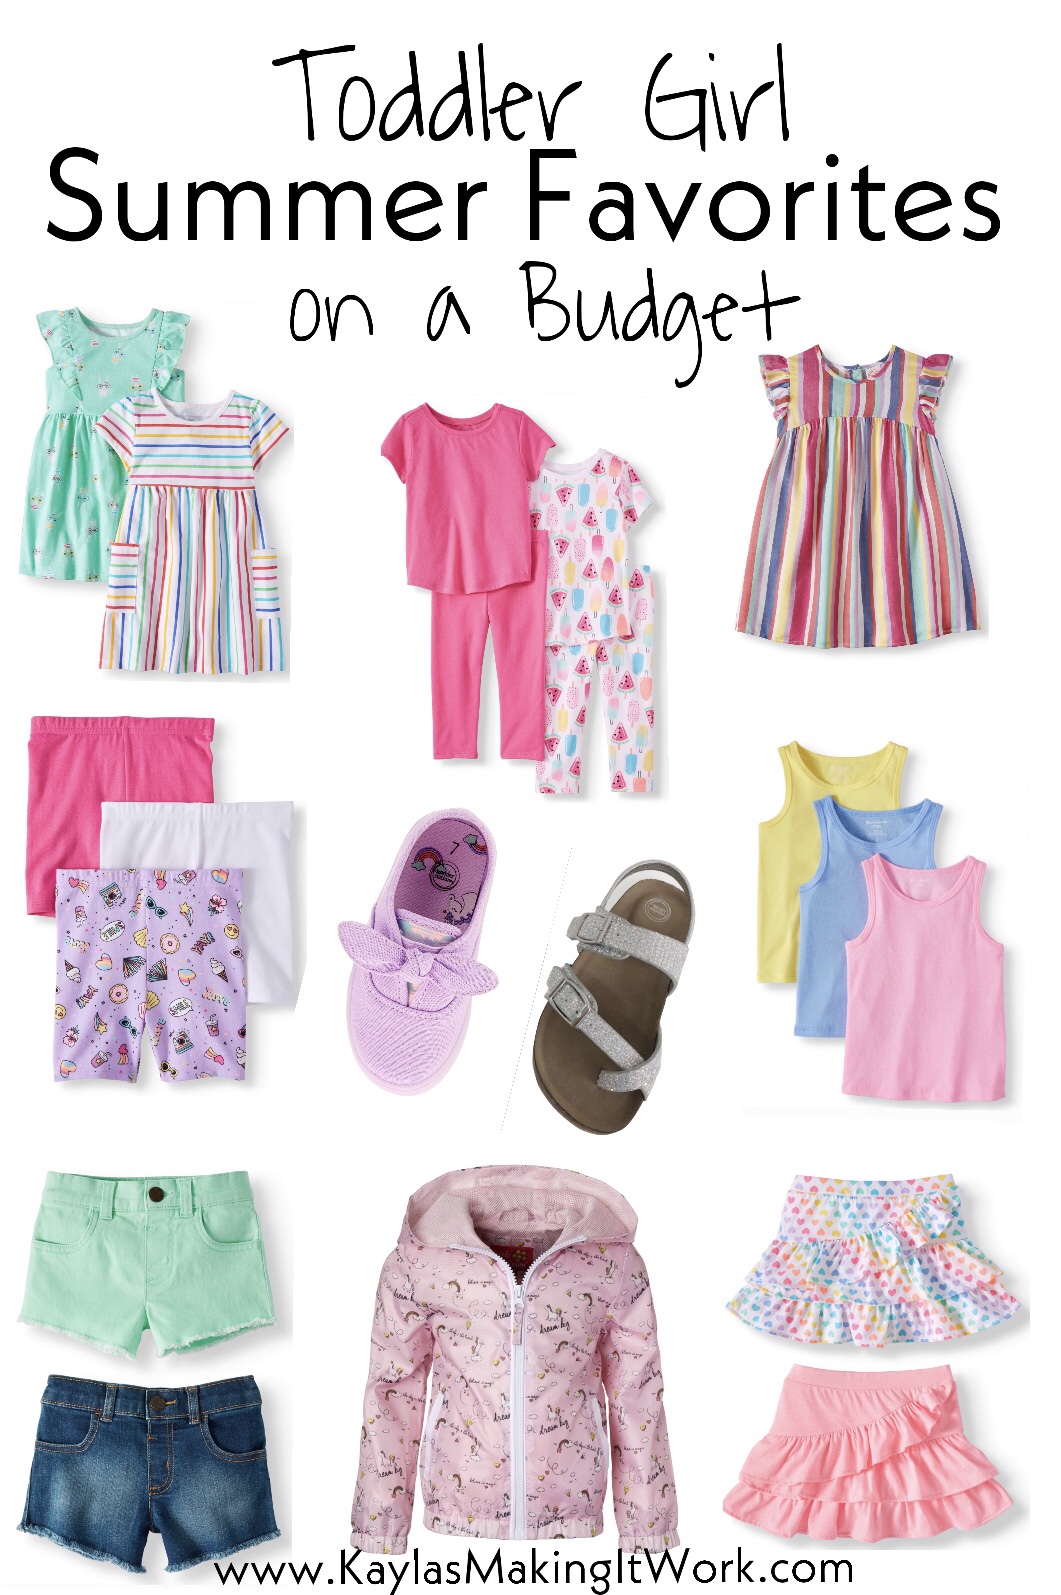 Toddler Girl Summer Clothes On a Budget